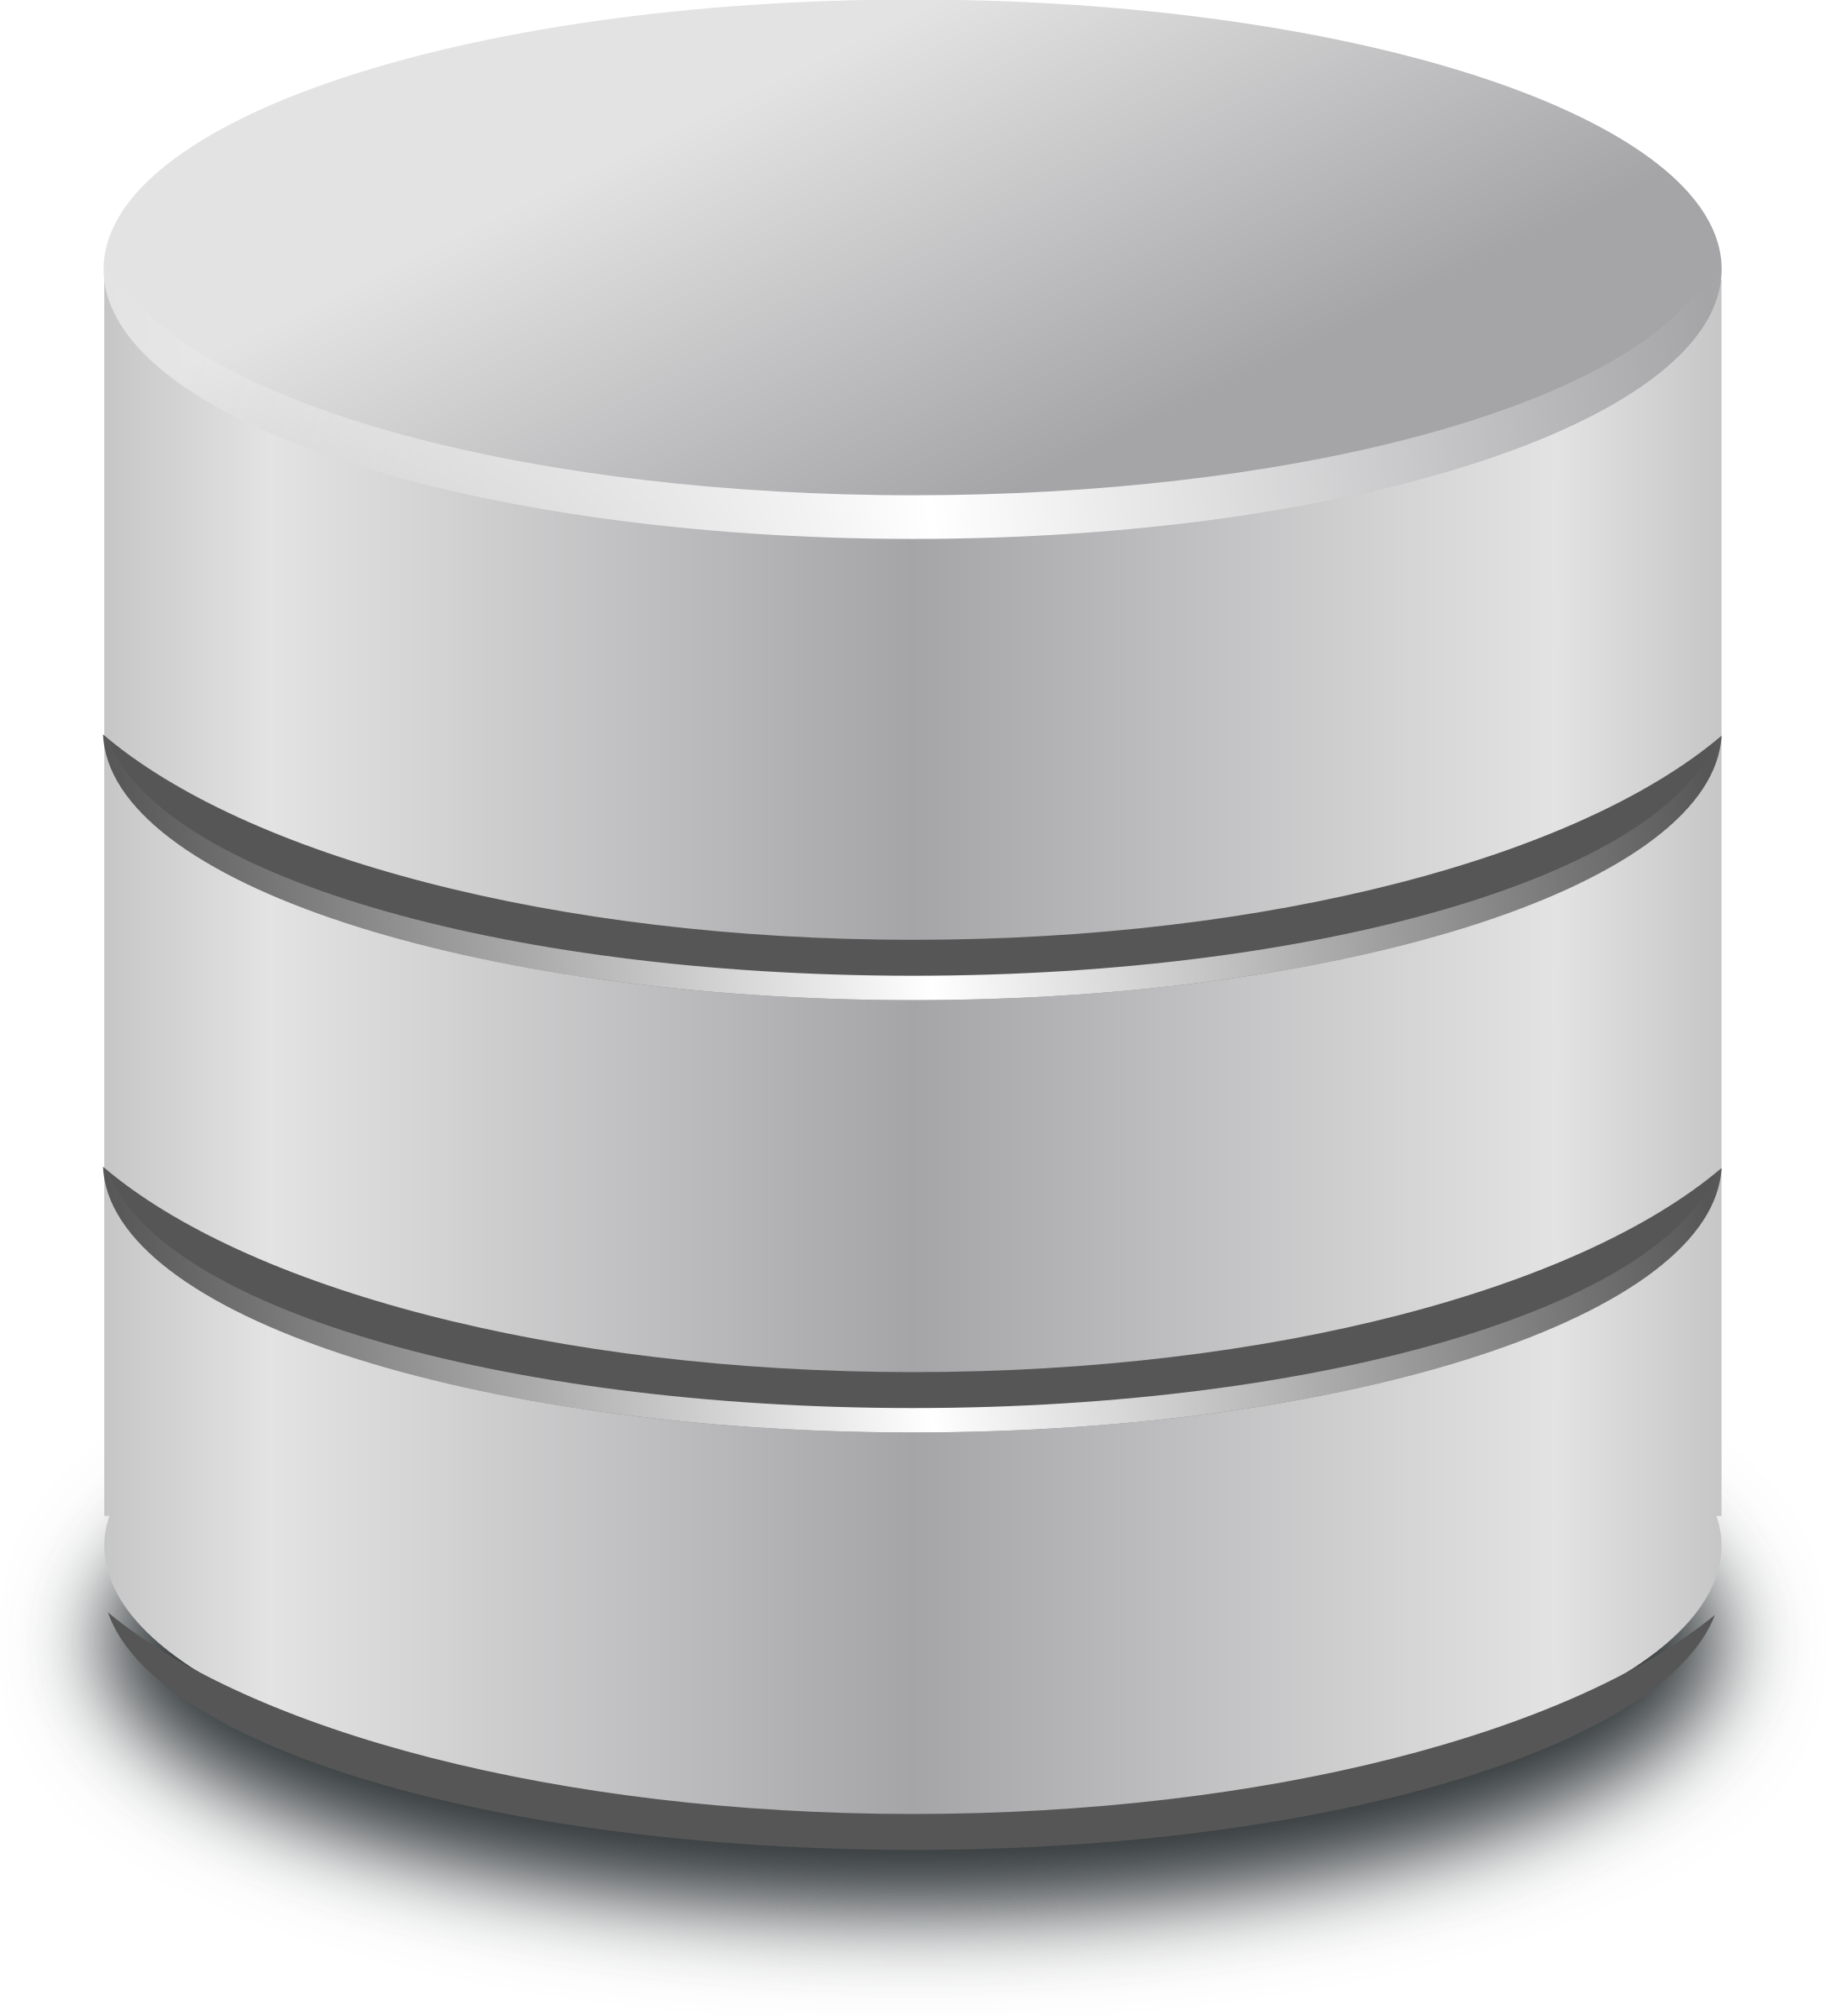 oracle database icon png